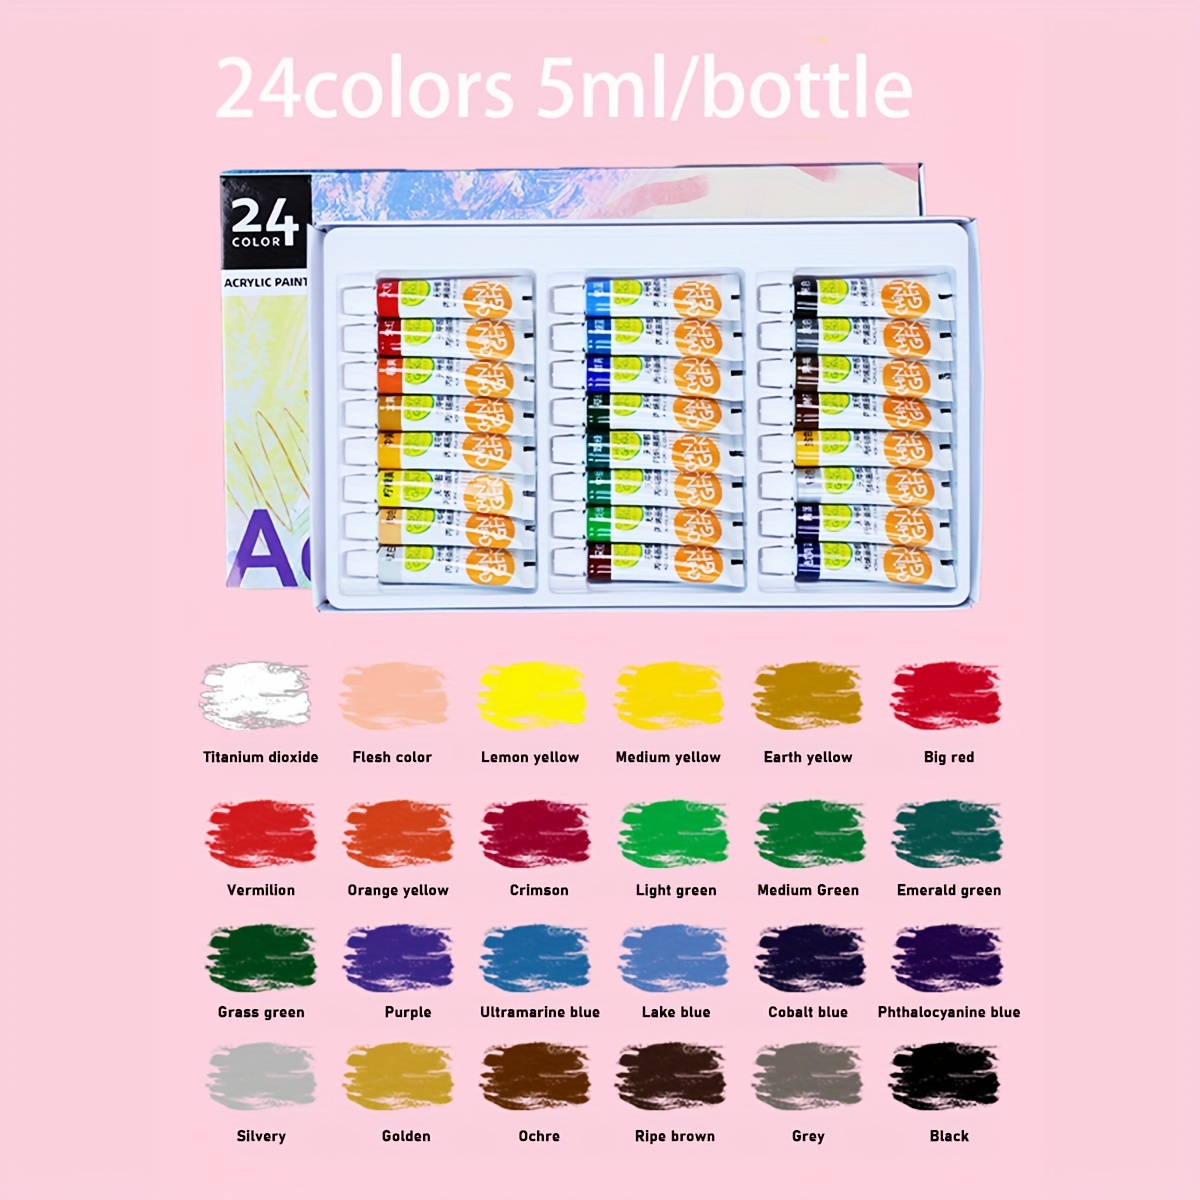 Aon-Art 24 Colours Acrylic Paint Set with Brushes and Canvas, Shop Today.  Get it Tomorrow!